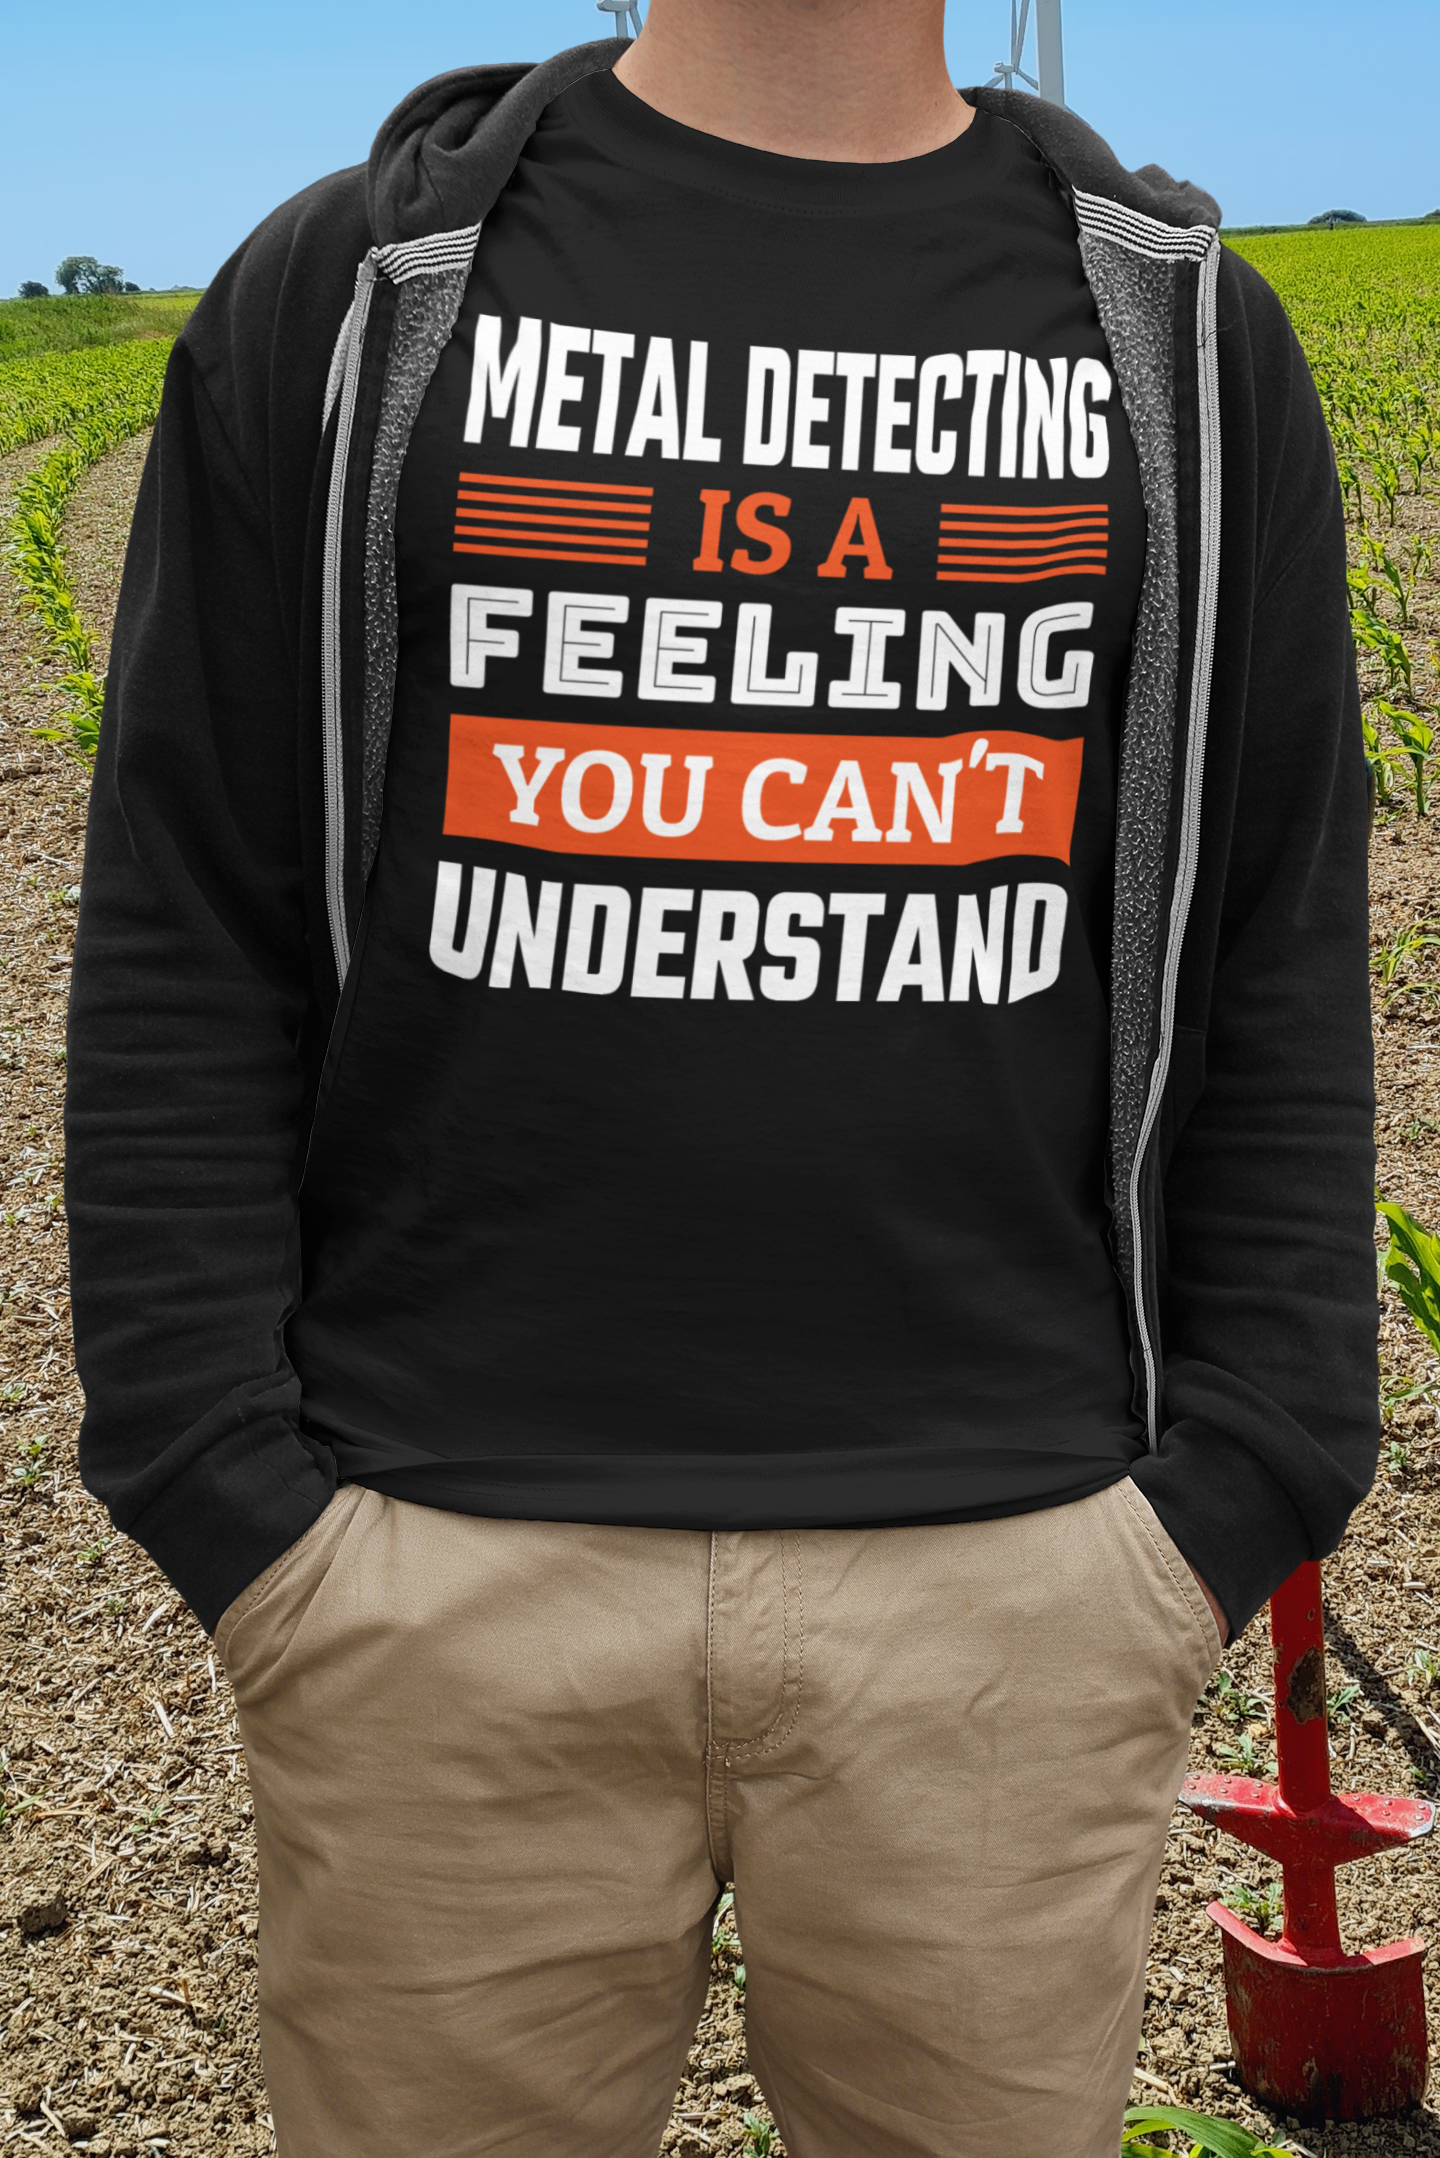 Metal detecting is a feeling you can't understand